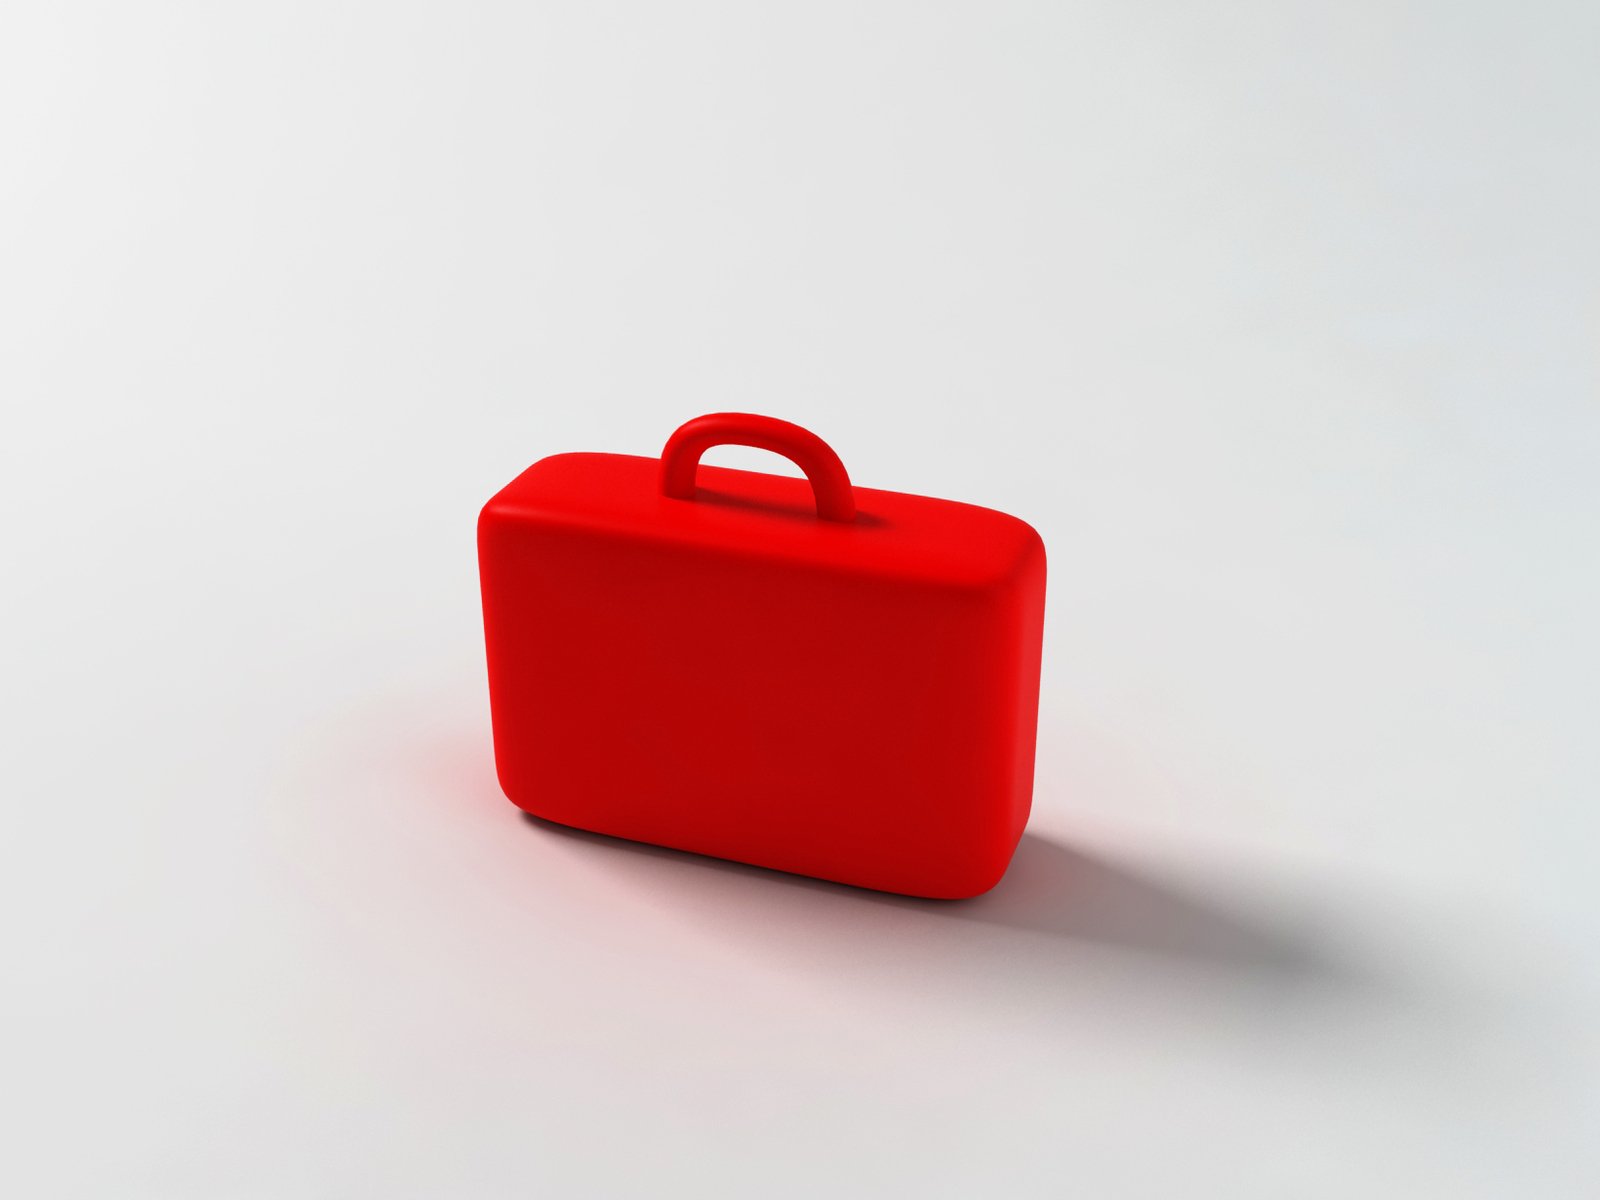 a red piece of luggage sits on a white background